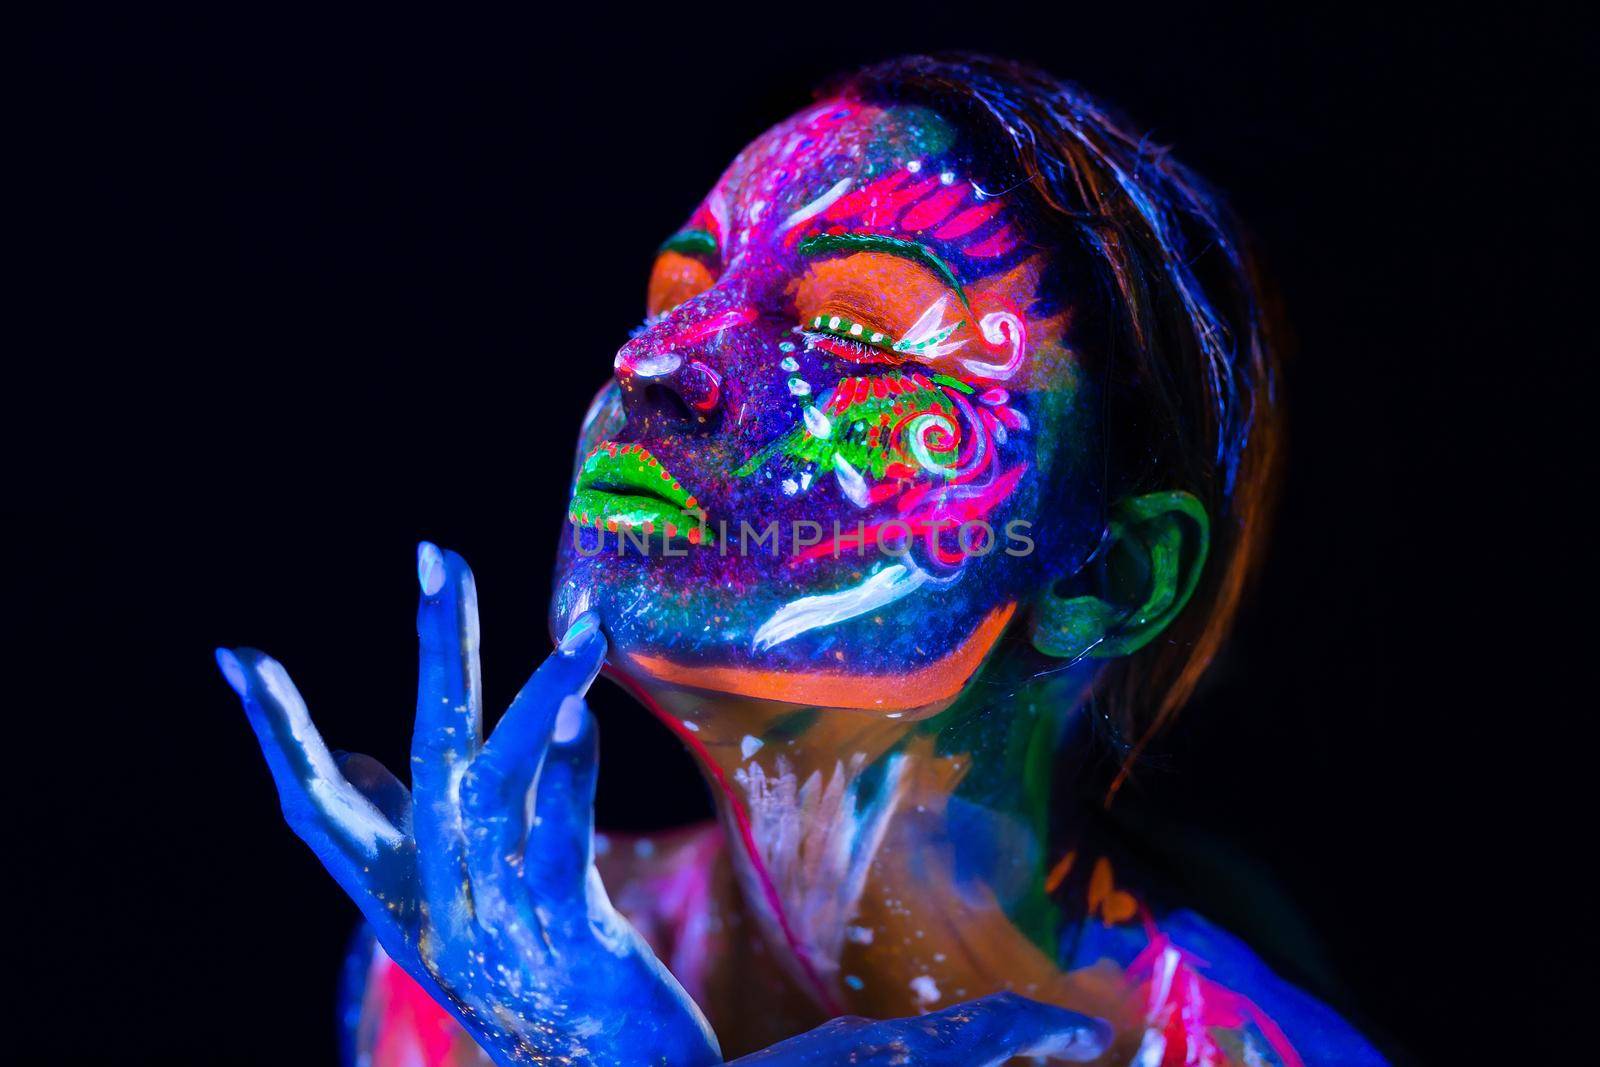 Body art glowing in ultraviolet light. Body art on the body and hand of a girl glowing in the ultraviolet light. by StudioPeace